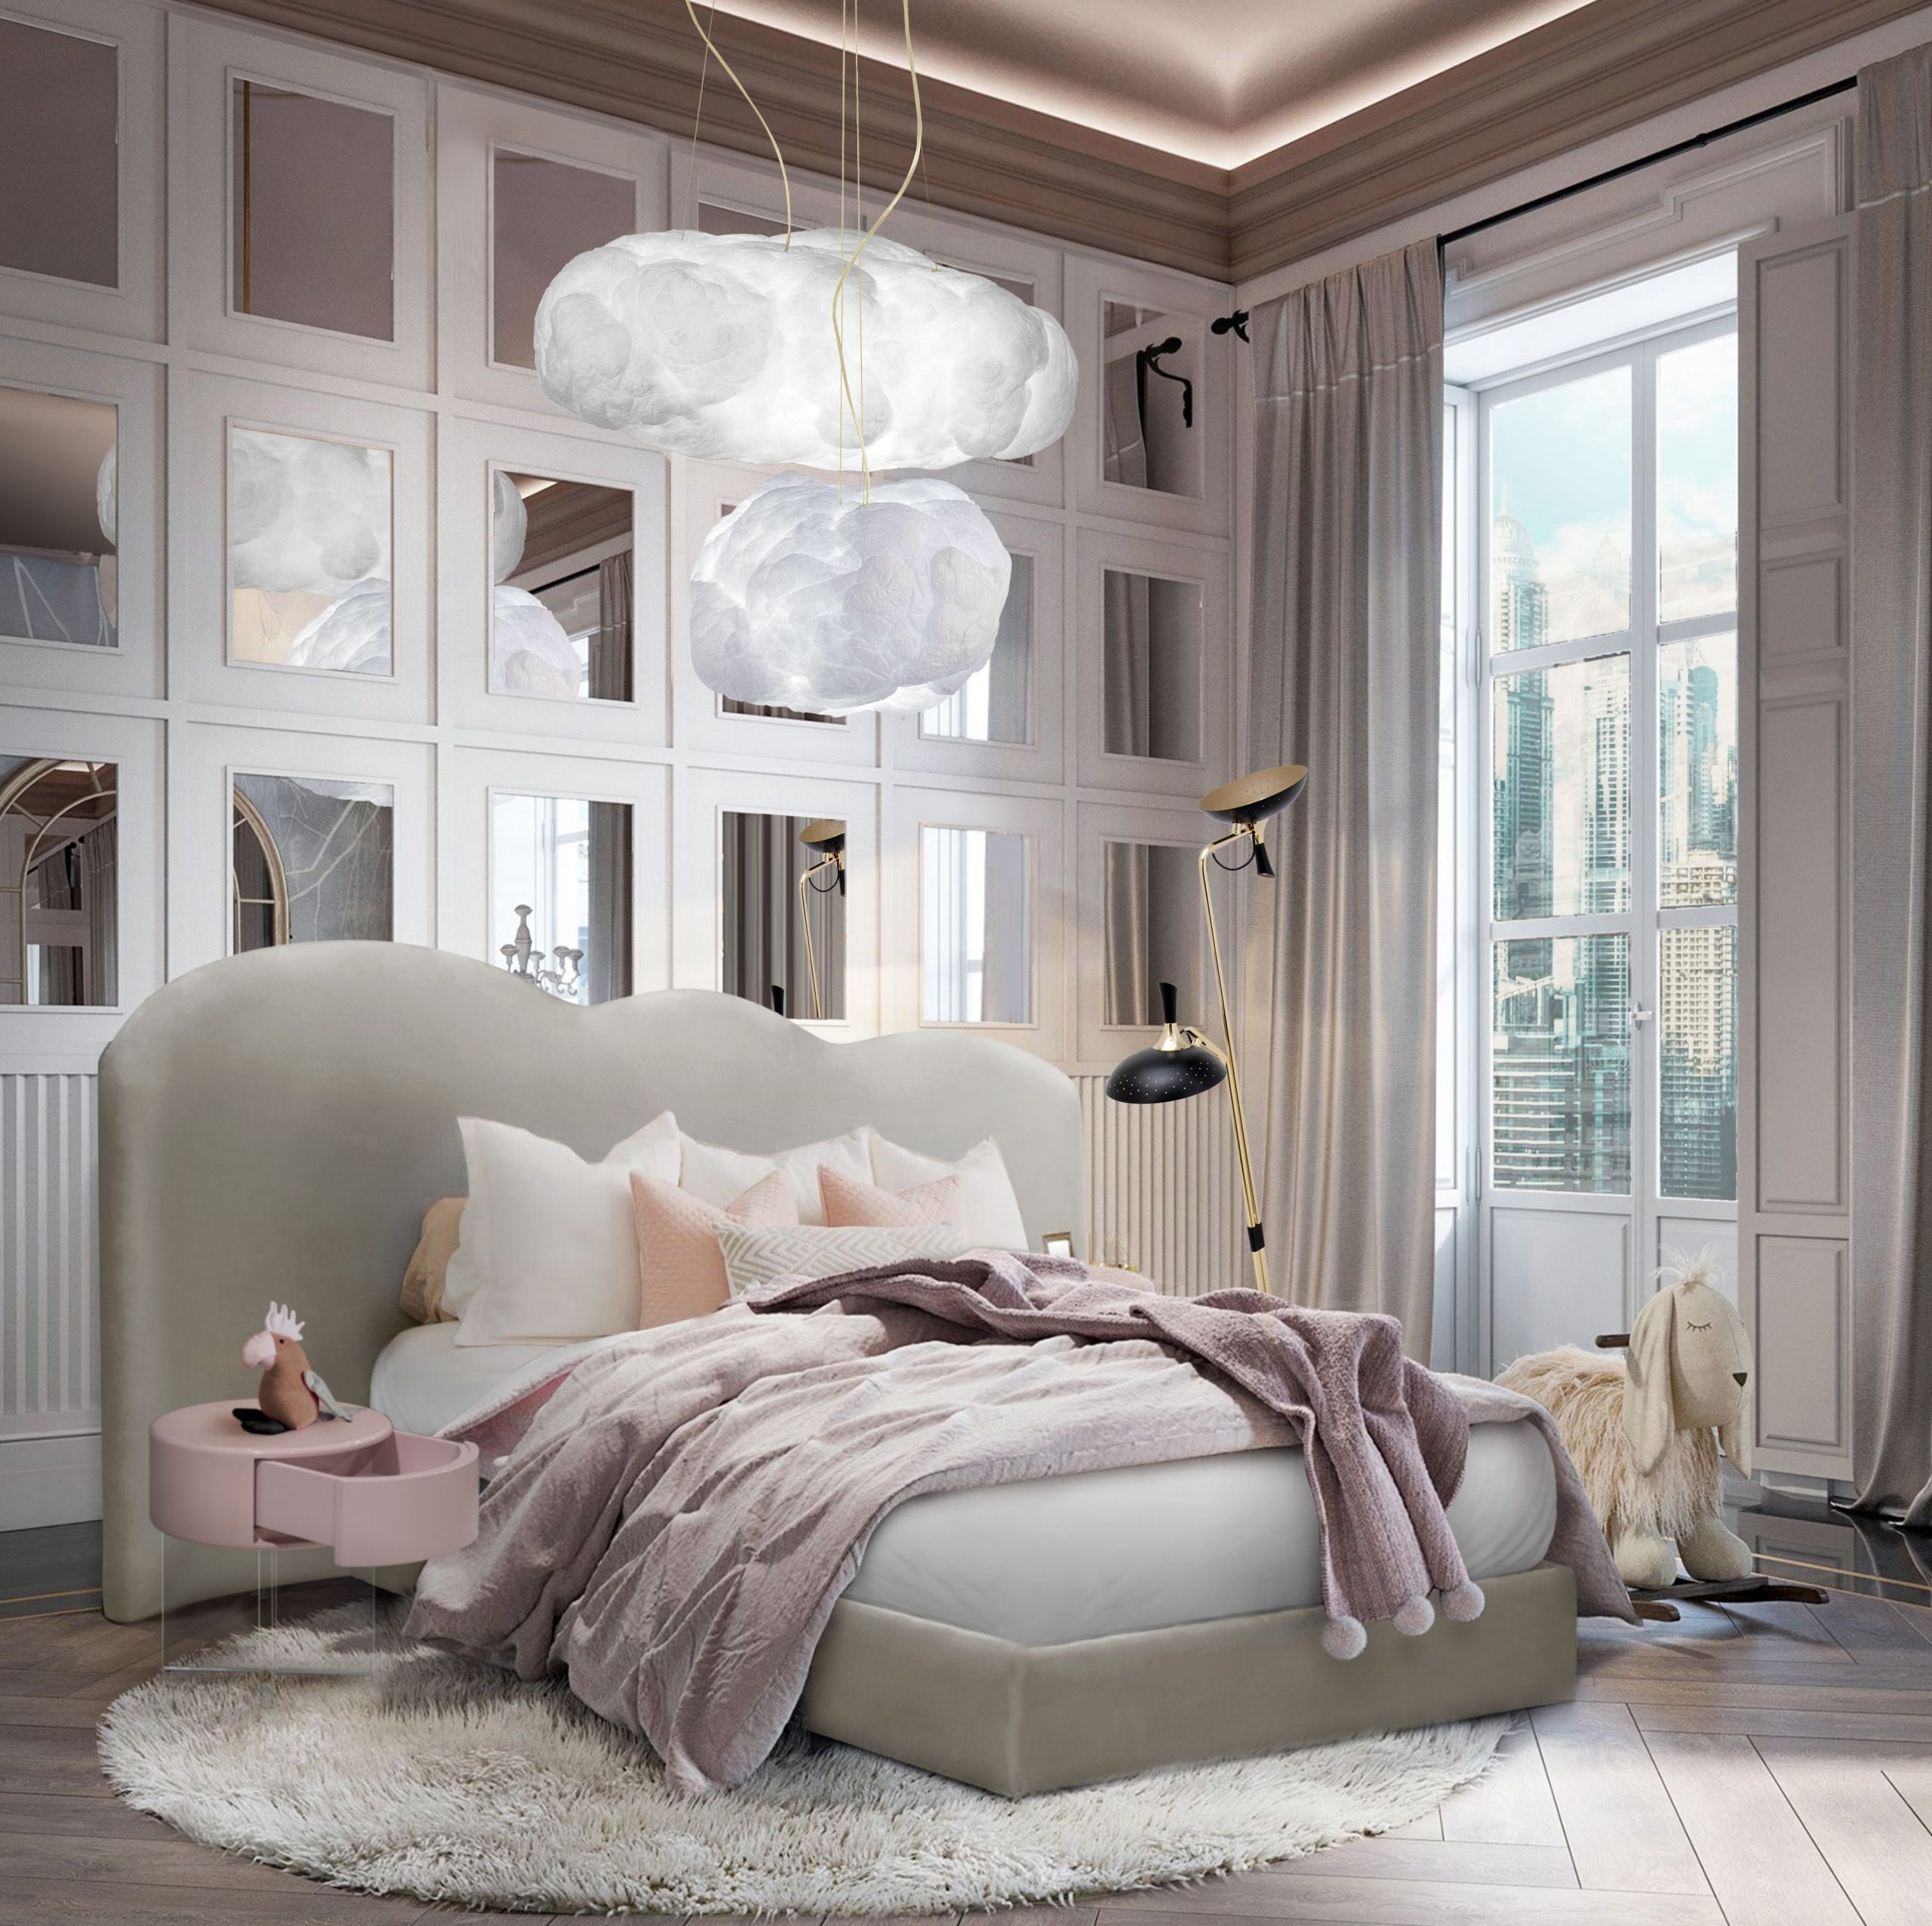 Discover The Most Exquisite Room By Room Inspirations With Luxxu